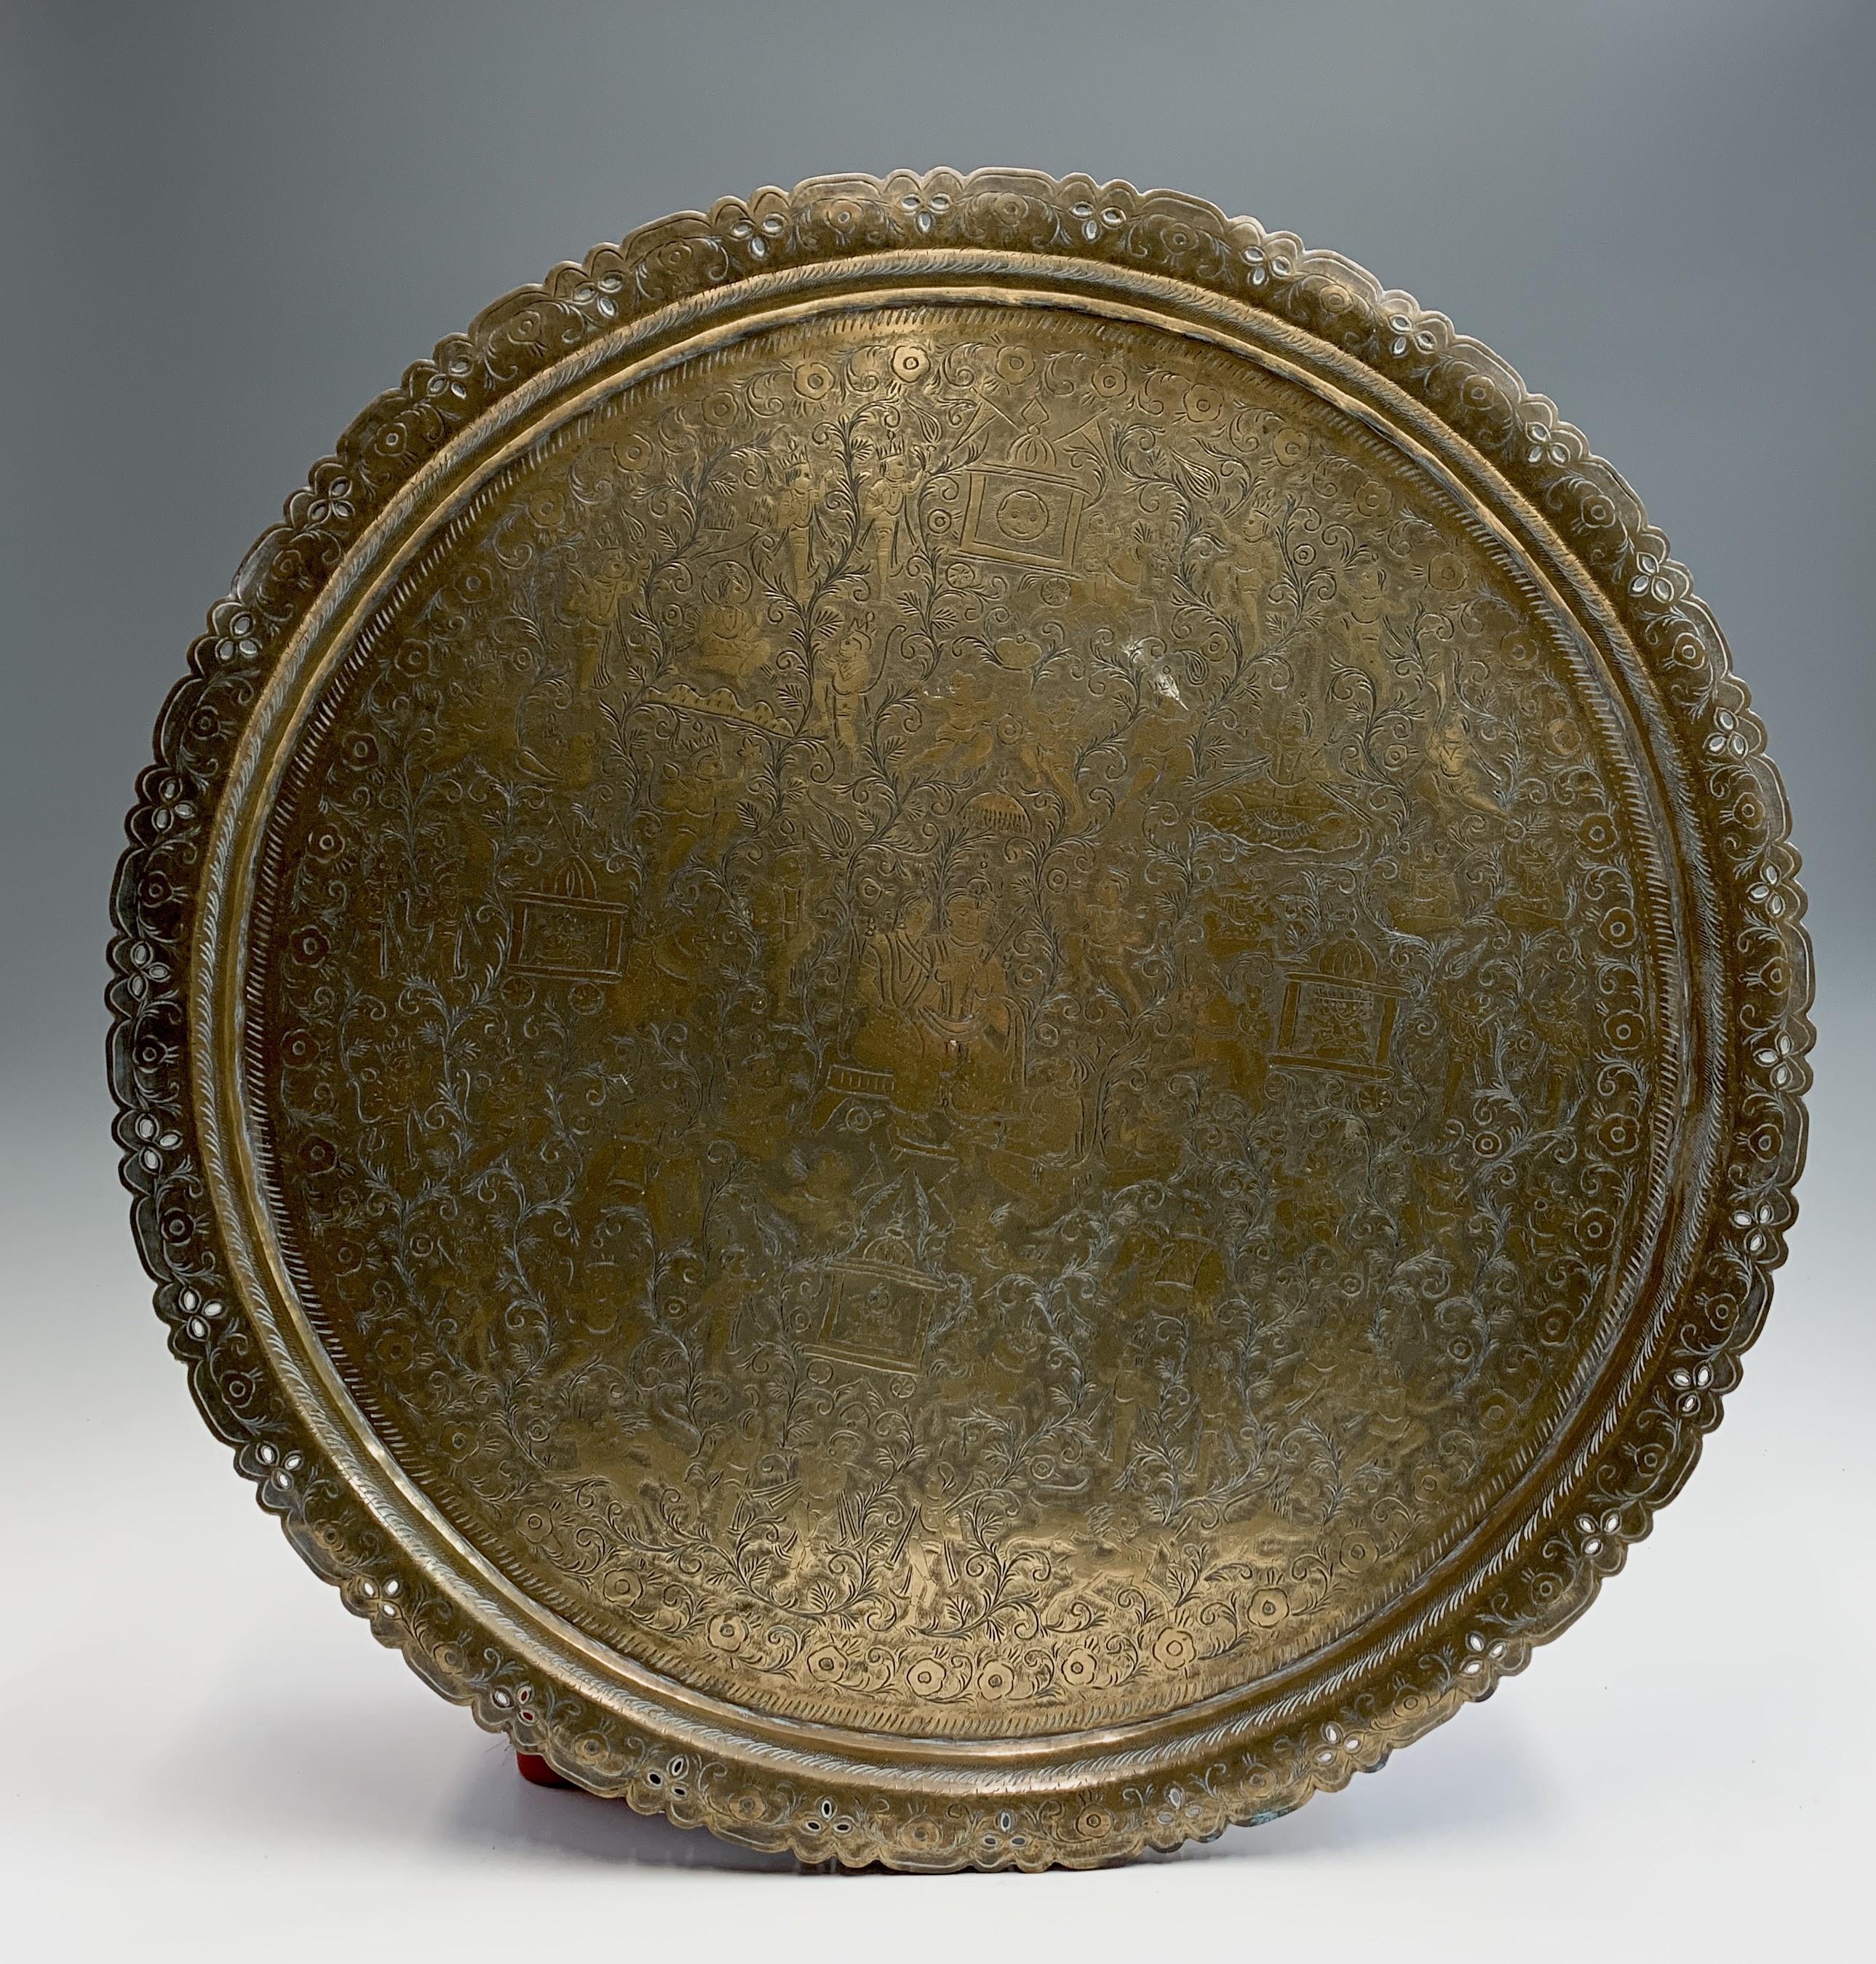 Lot 259 - A large Indian brass tray engraved with a